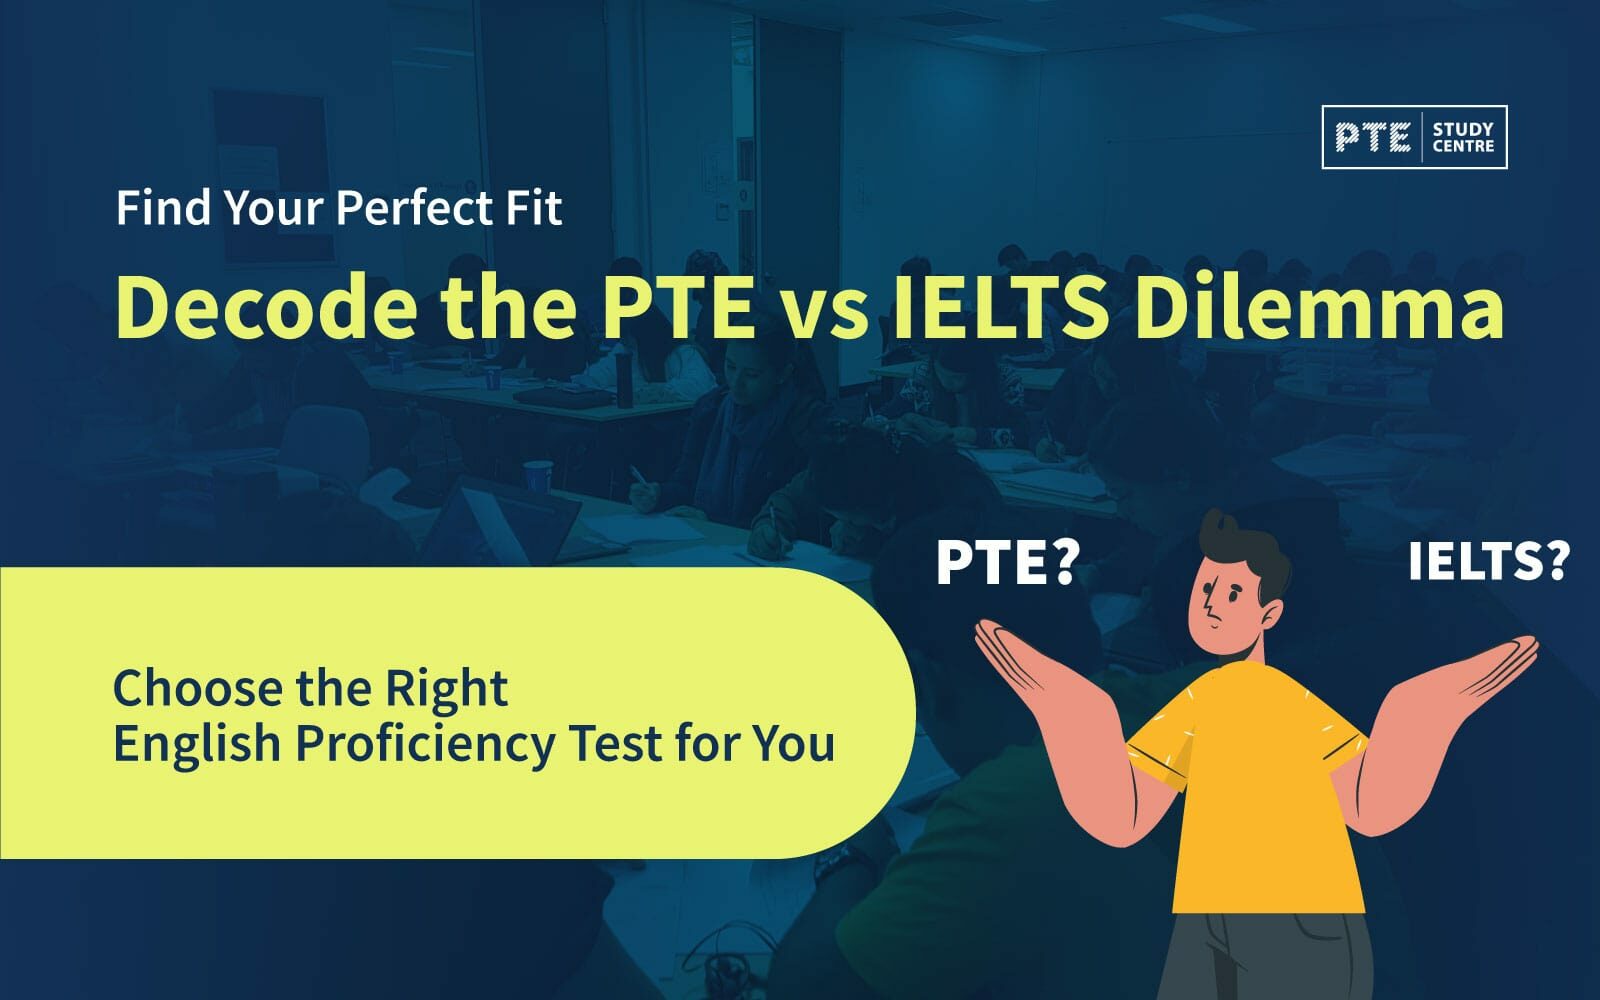 Find Your Perfect Fit: Decode the PTE vs IELTS Dilemma and Choose the Right English Proficiency Test for You